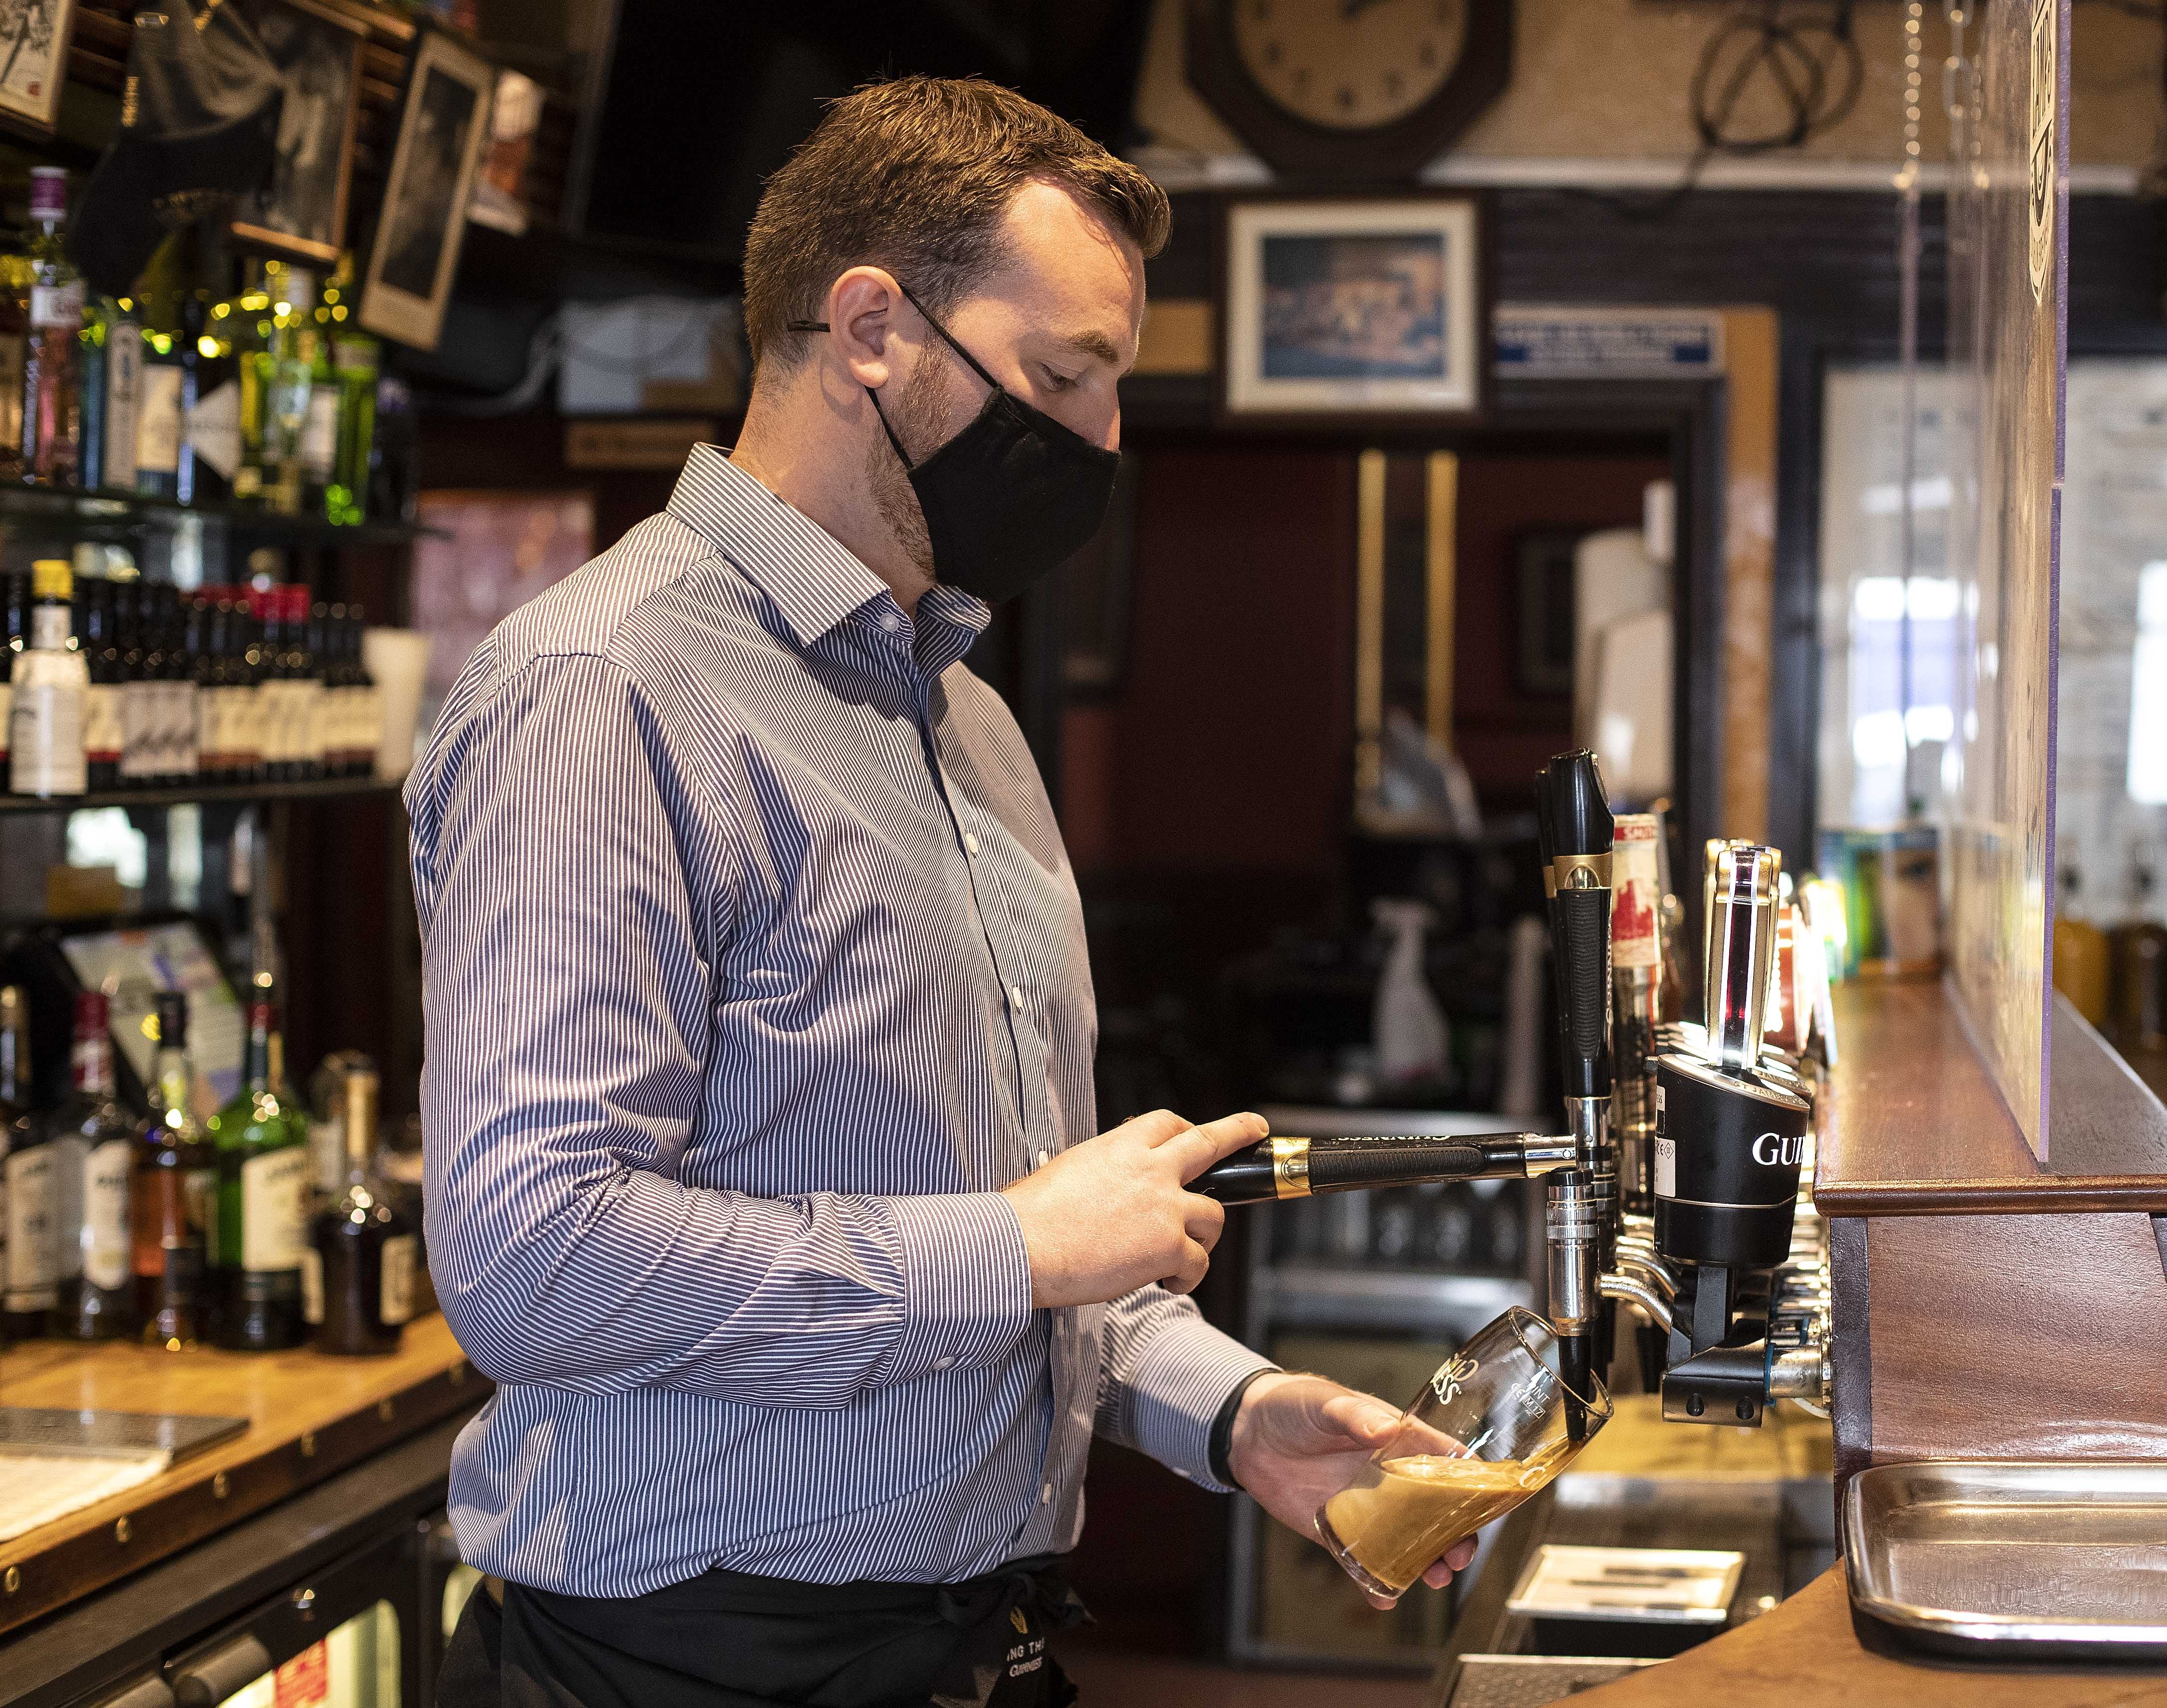 Pubs are among the sectors affected by the new rules (Damien Eagers/PA)